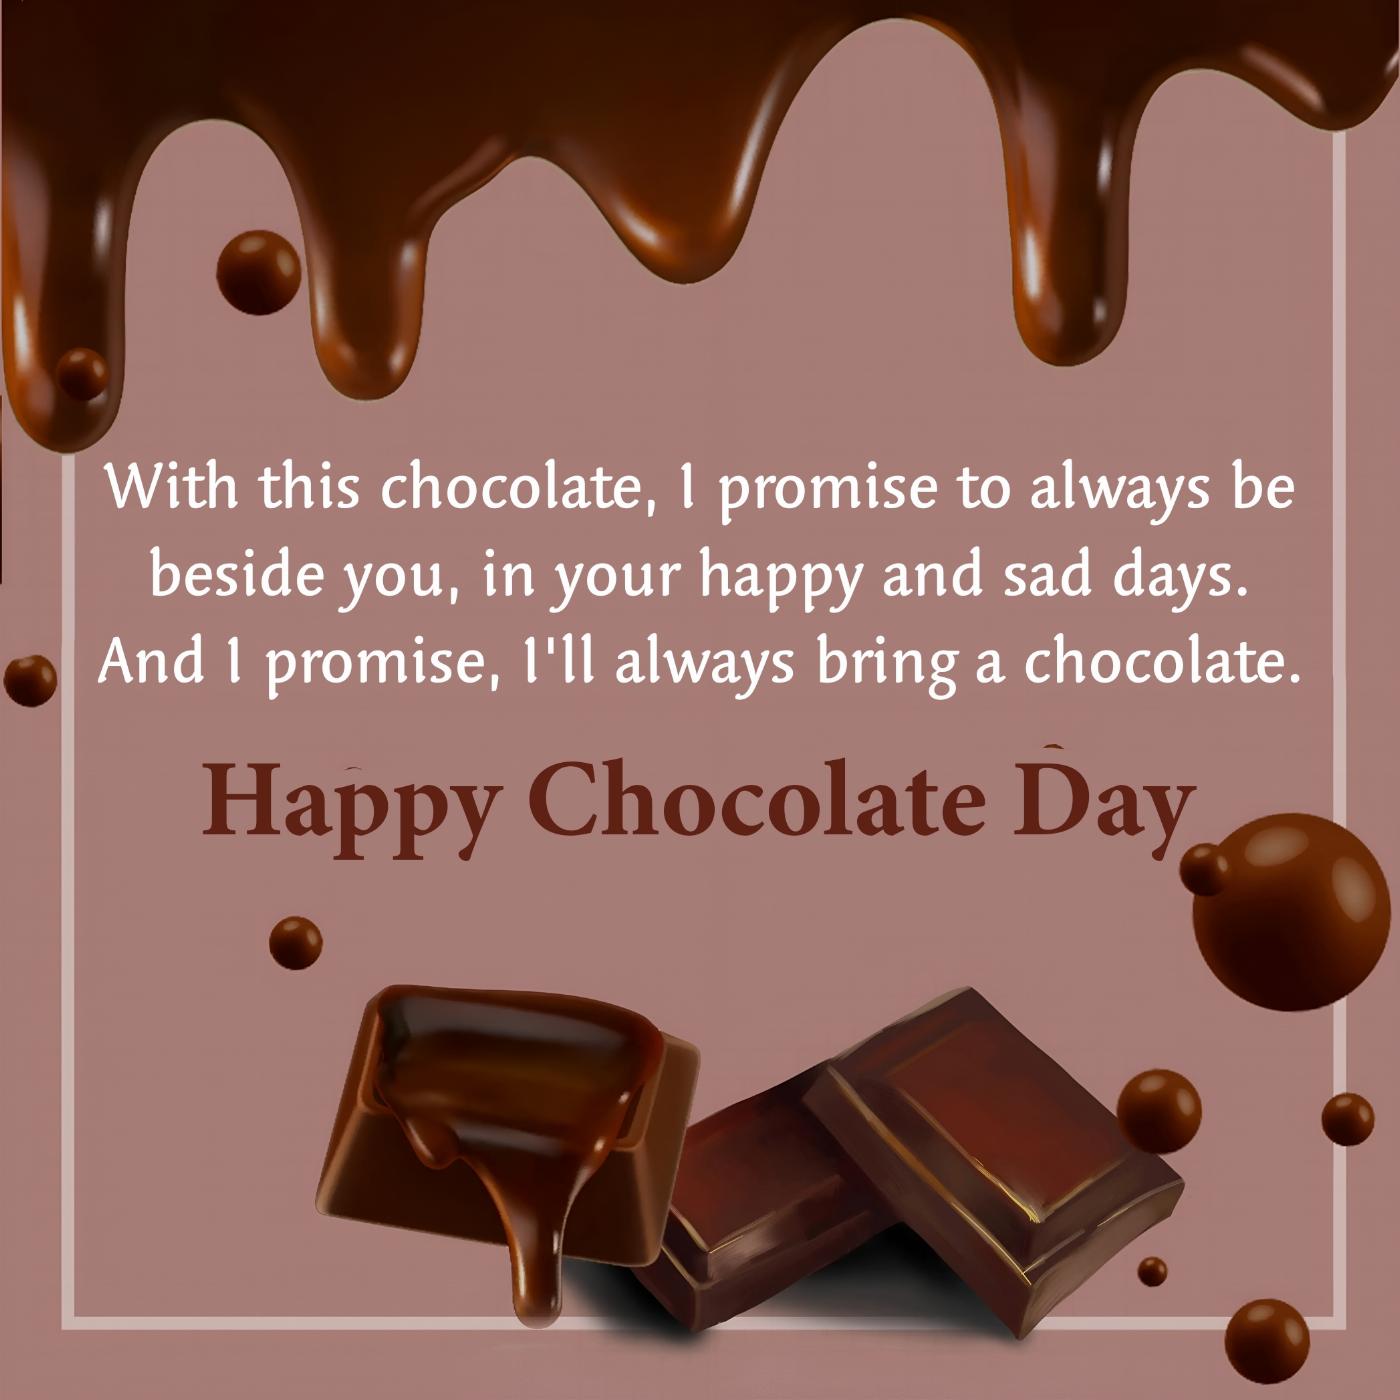 With this chocolate I promise to always be beside you